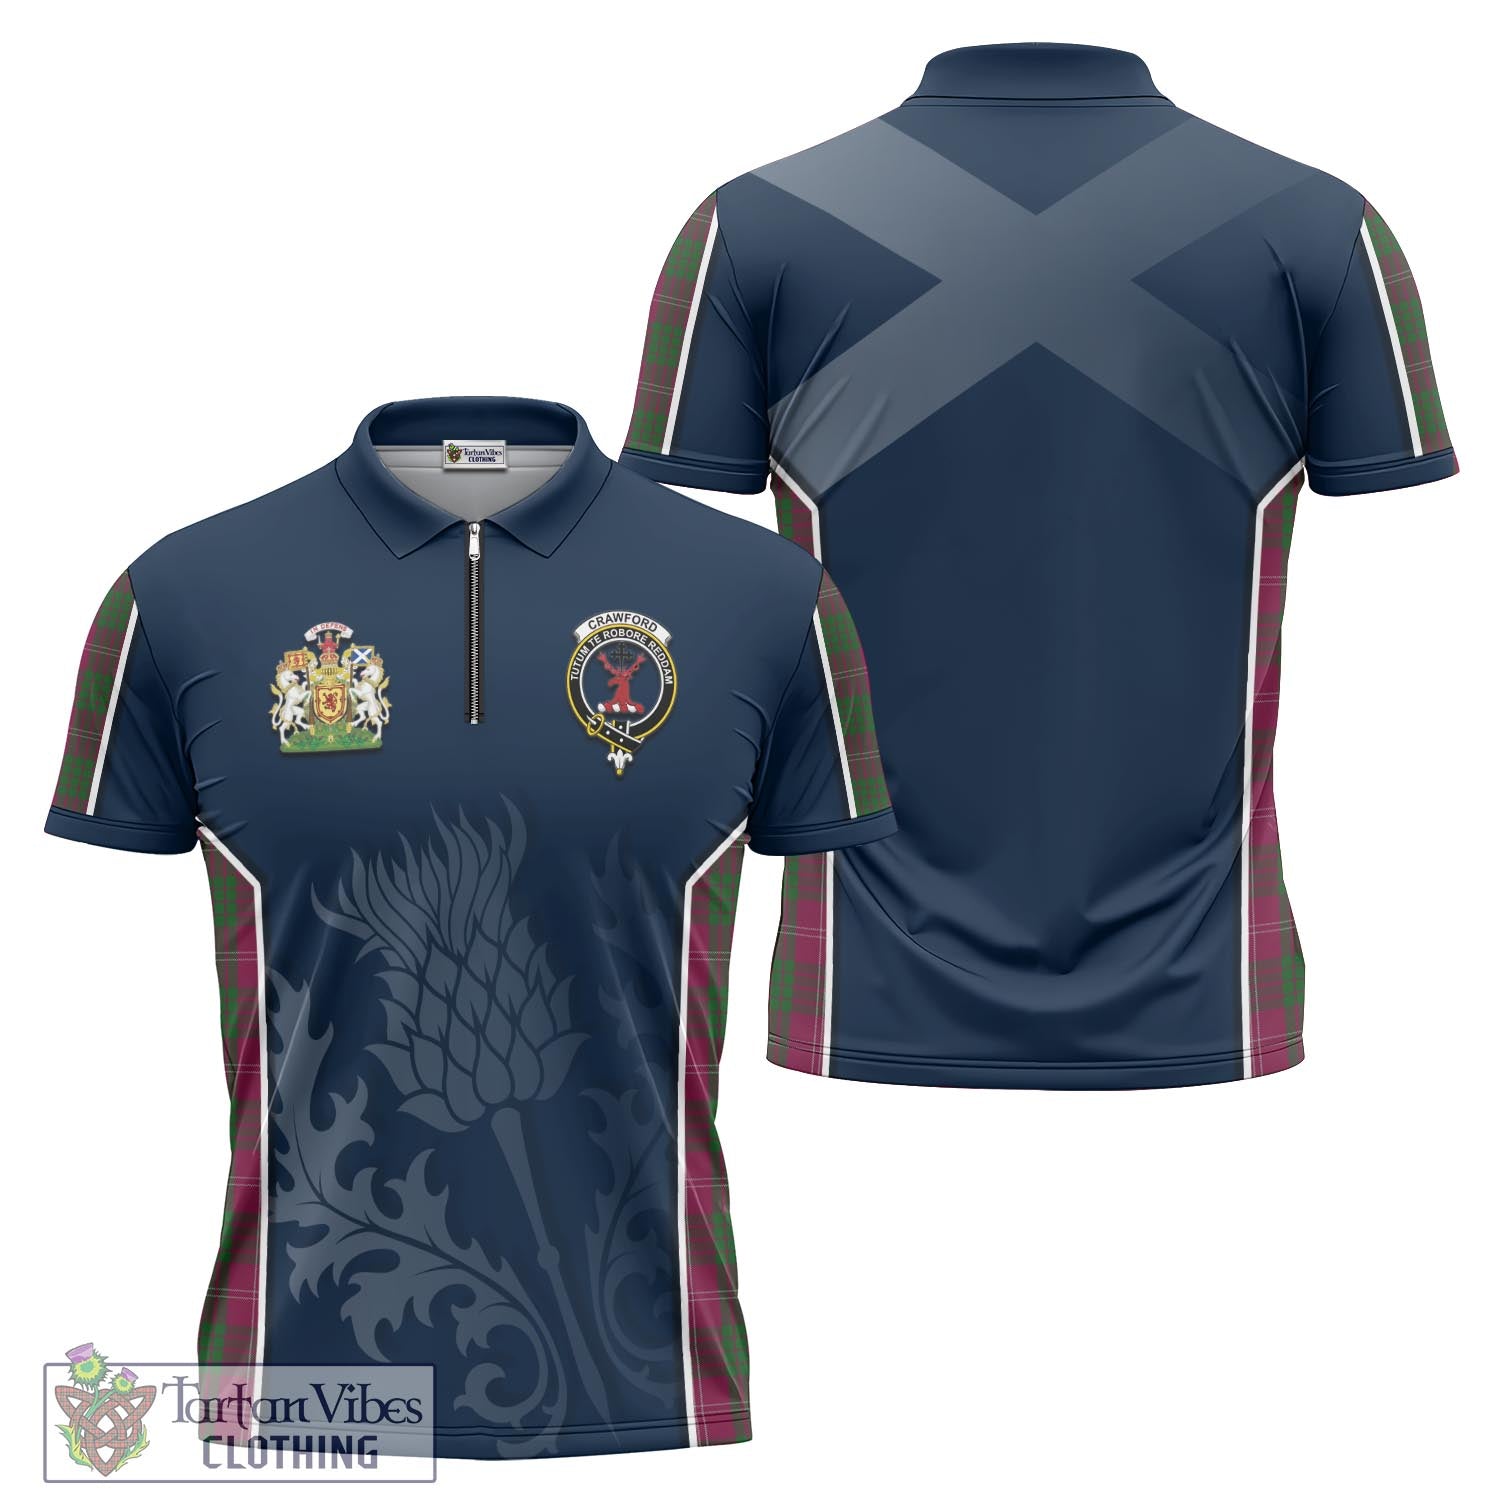 Tartan Vibes Clothing Crawford Tartan Zipper Polo Shirt with Family Crest and Scottish Thistle Vibes Sport Style